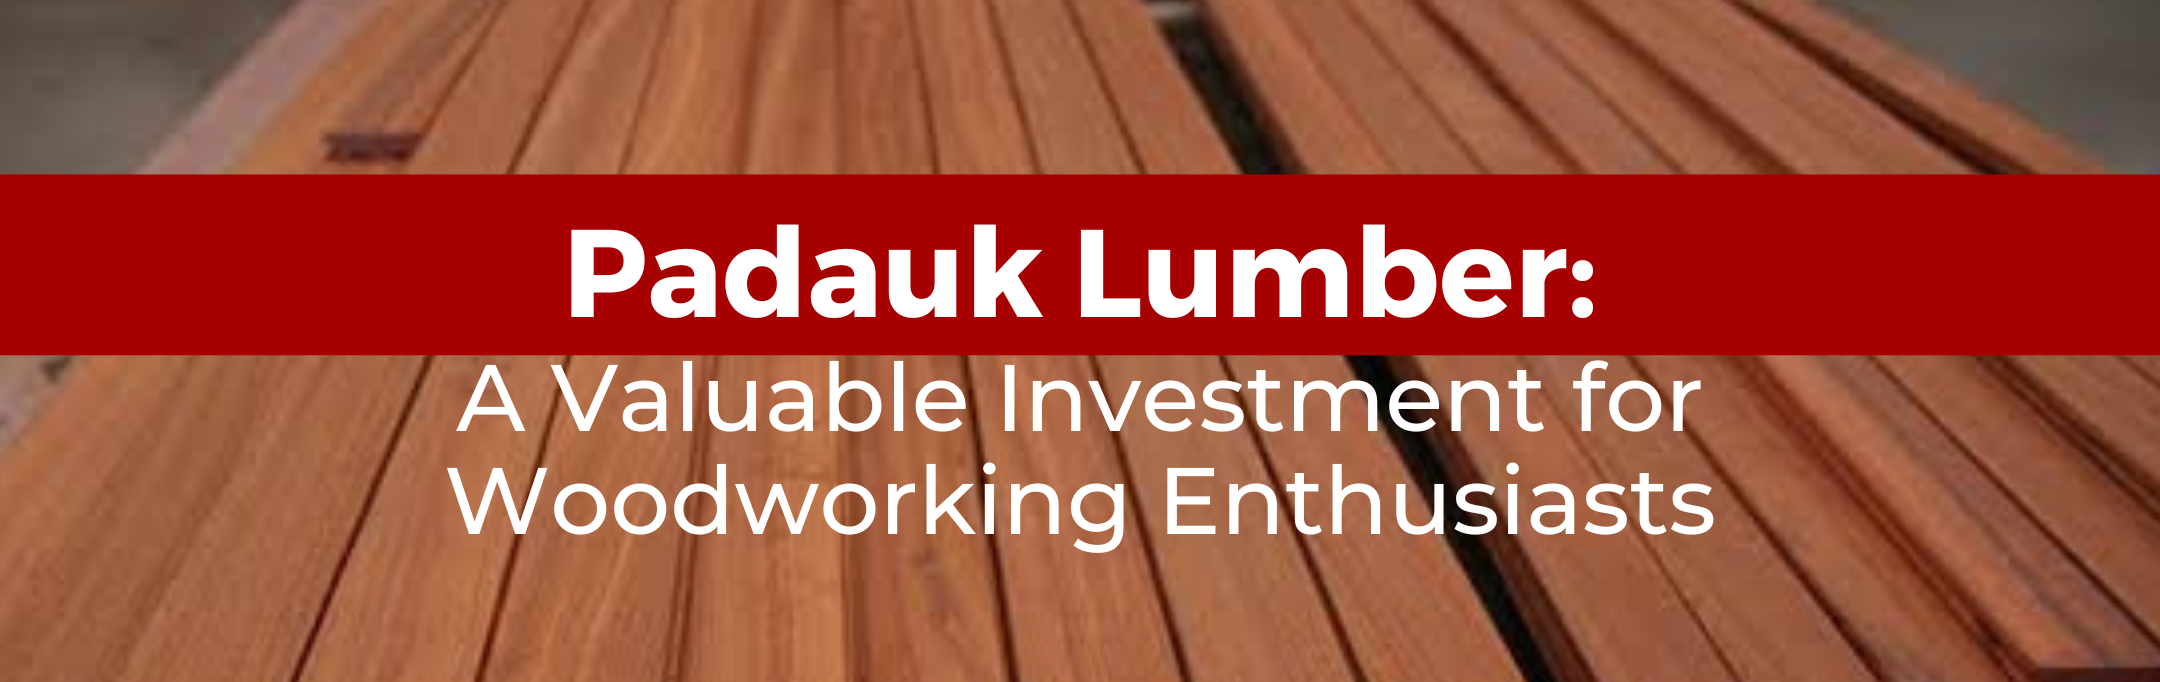 Padauk Lumber: A Valuable Investment for Woodworking Enthusiasts